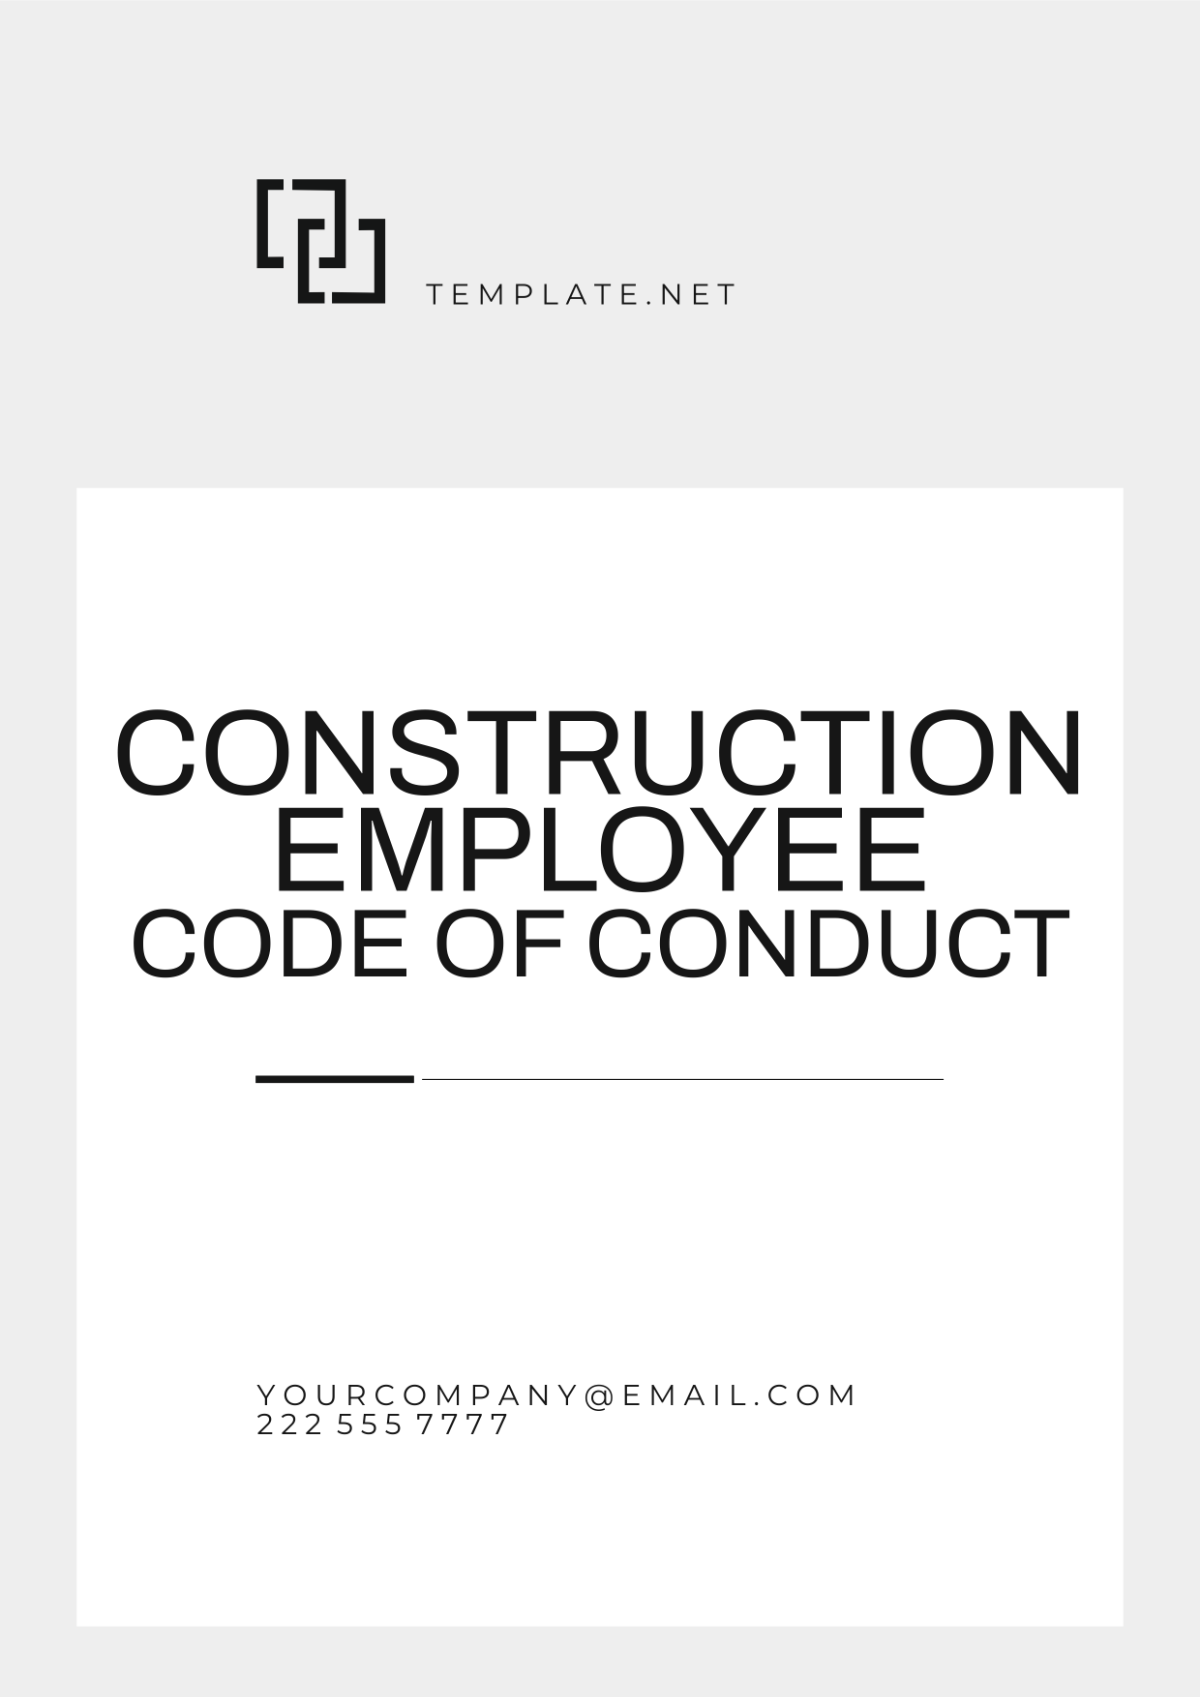 Free Construction Employee Code of Conduct Template